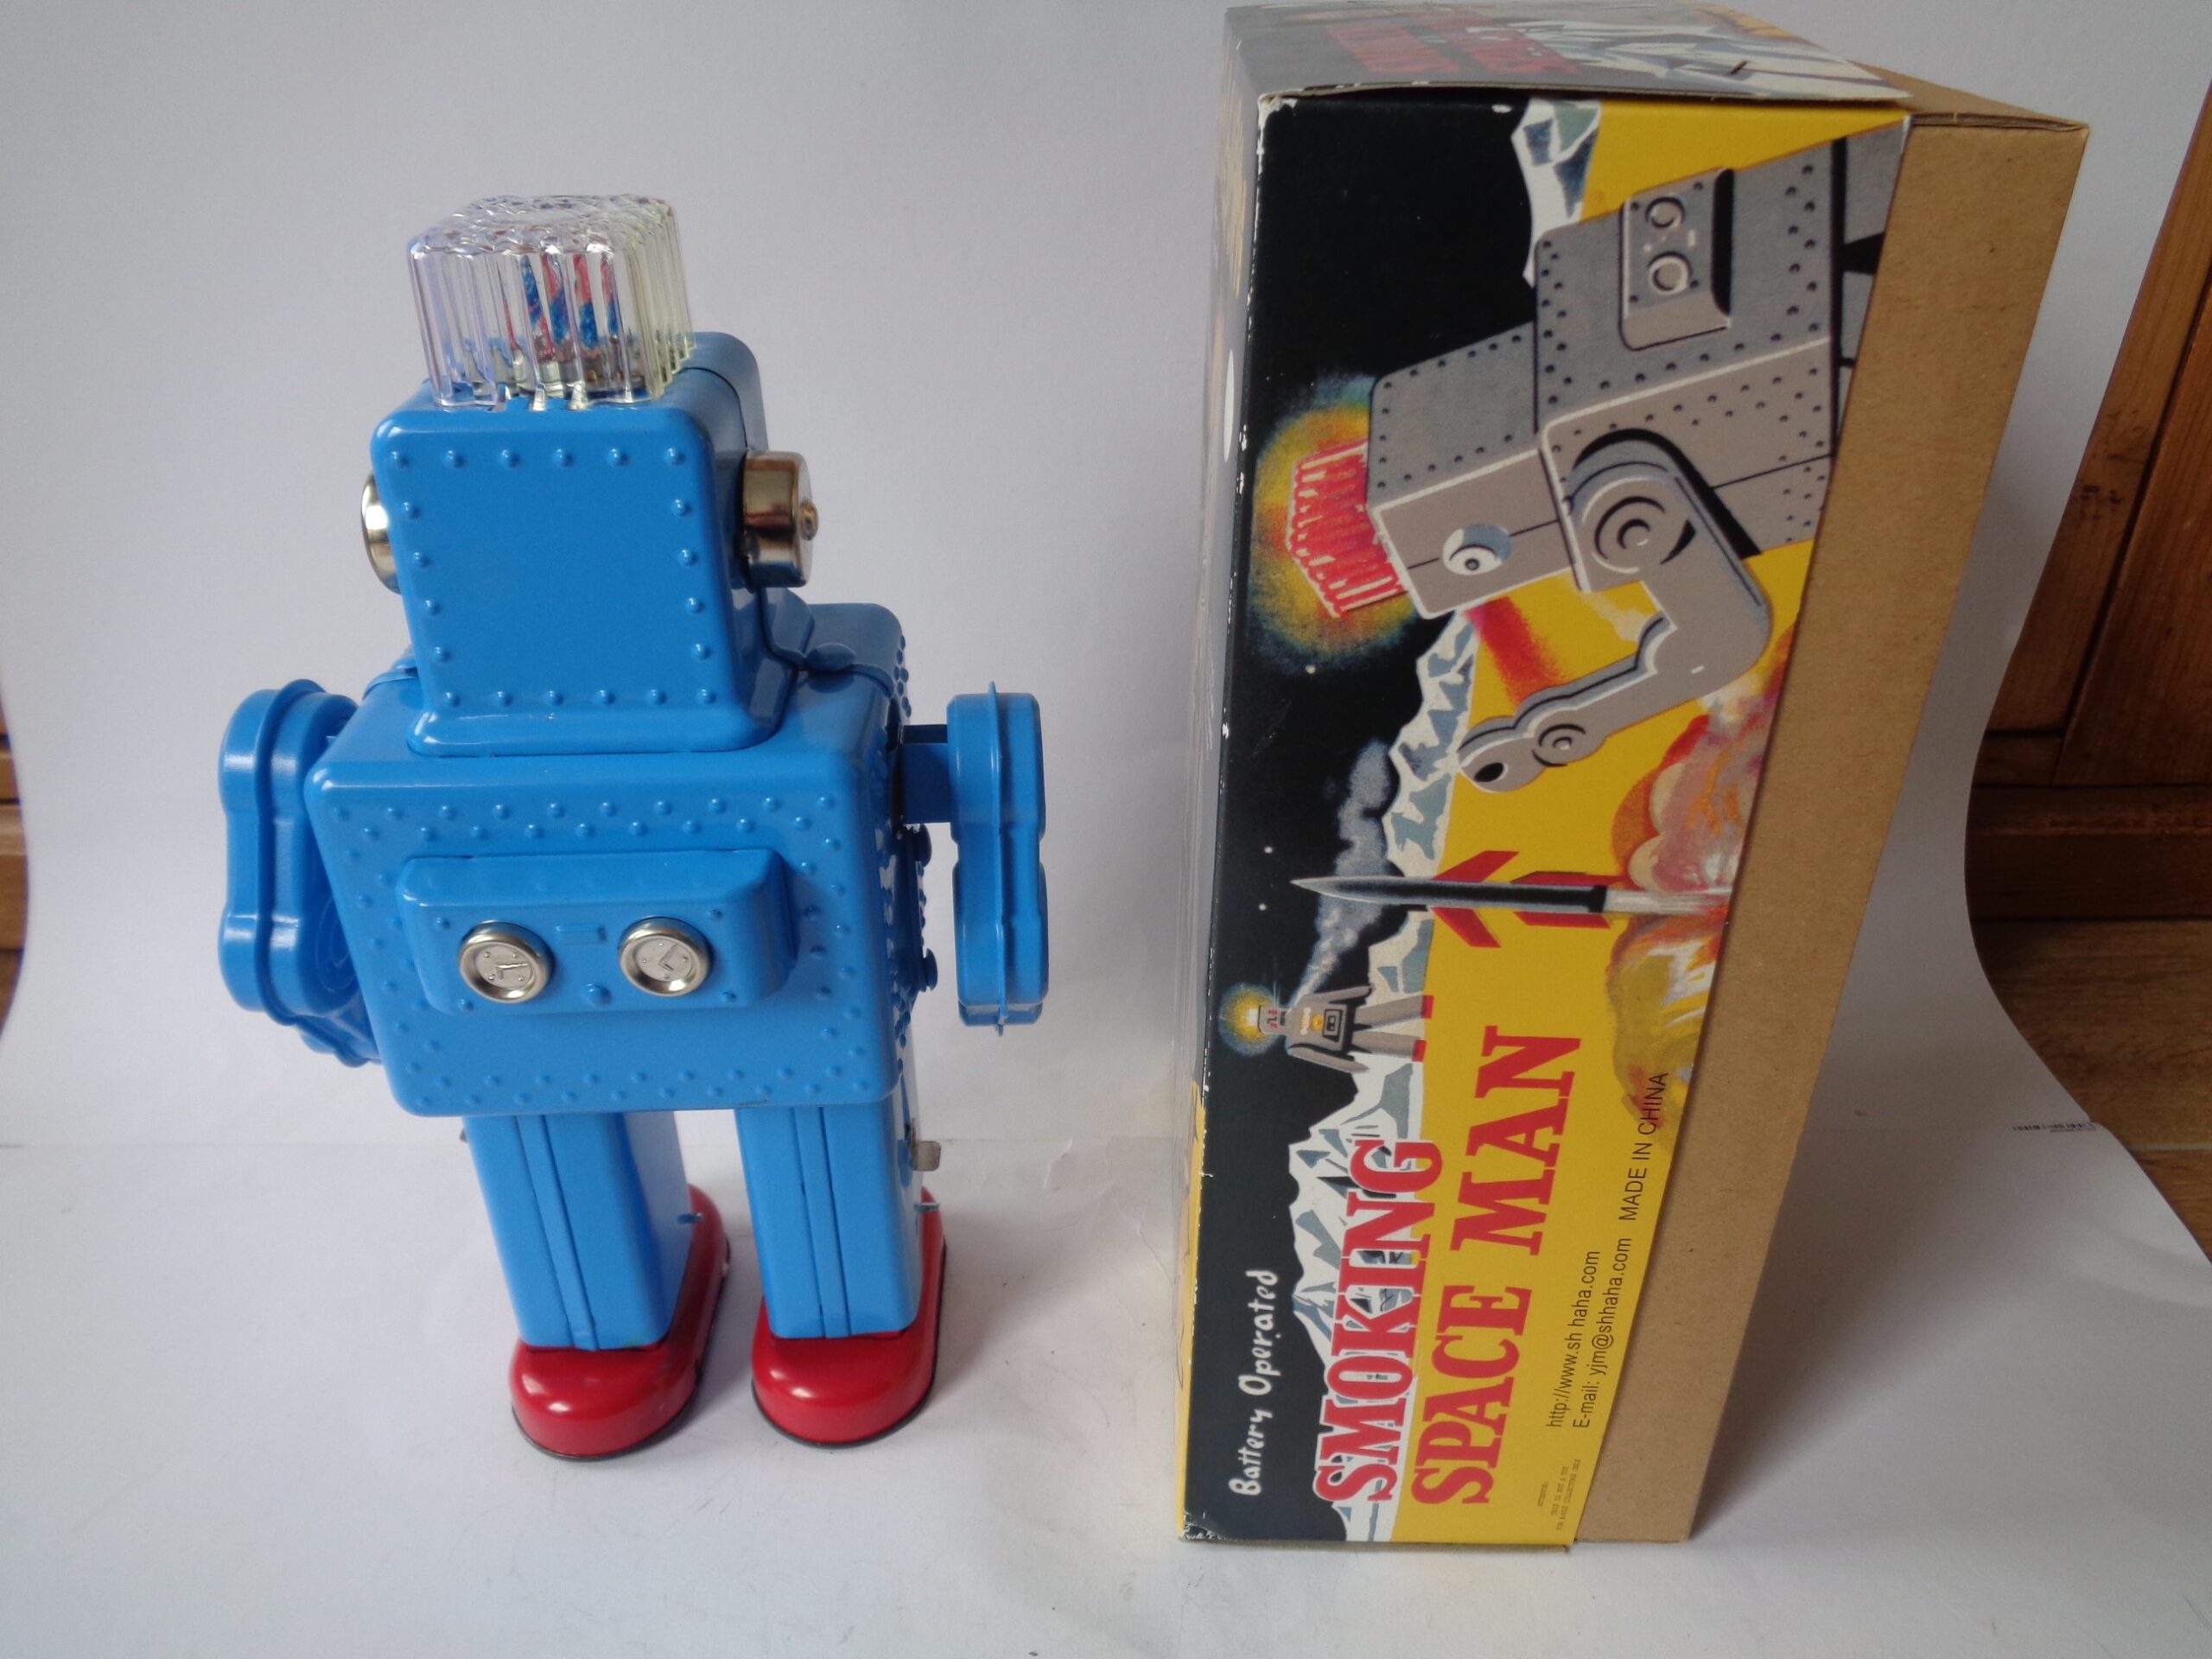 Ha Ha Toy Smoking Spaceman Robot with Box (battery-operated)